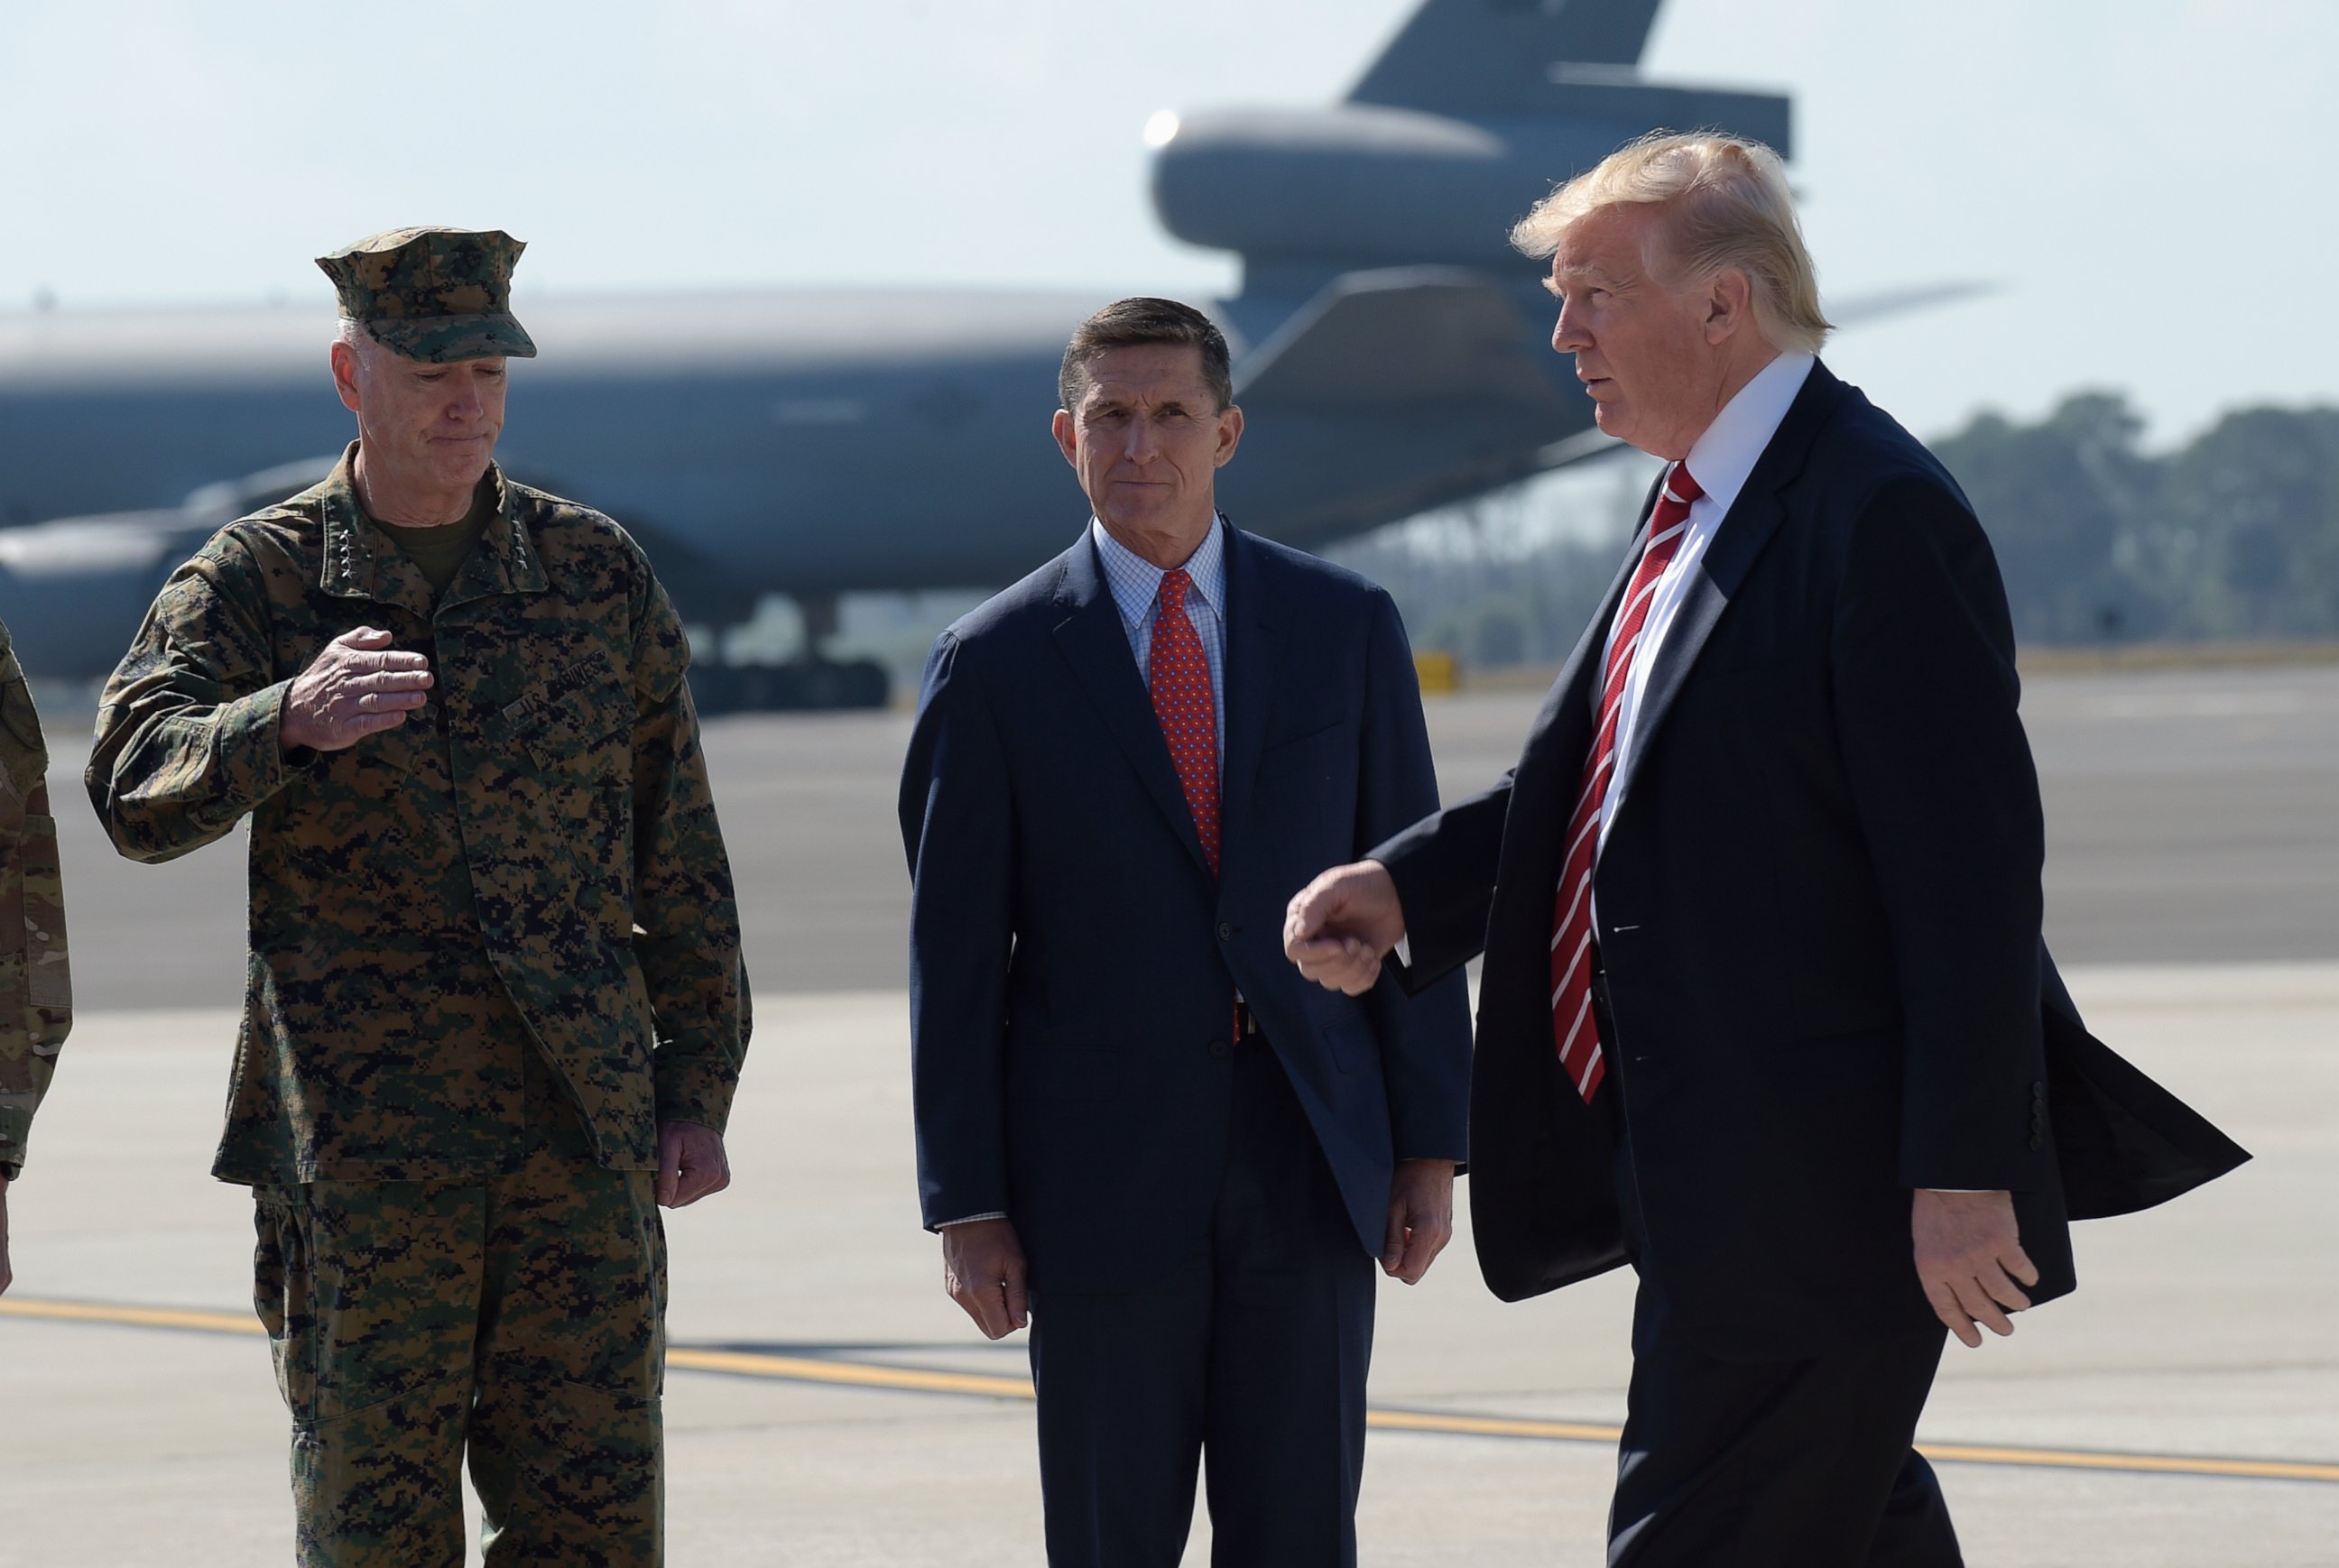 PHOTO: President Donald Trump passed Joint Chiefs Chairman Gen. Joseph Dunford, left, and National Security Adviser Michael Flynn as he arrives via Air Force One at MacDill Air Force Base in Tampa, Florida, Feb. 6, 2017. 